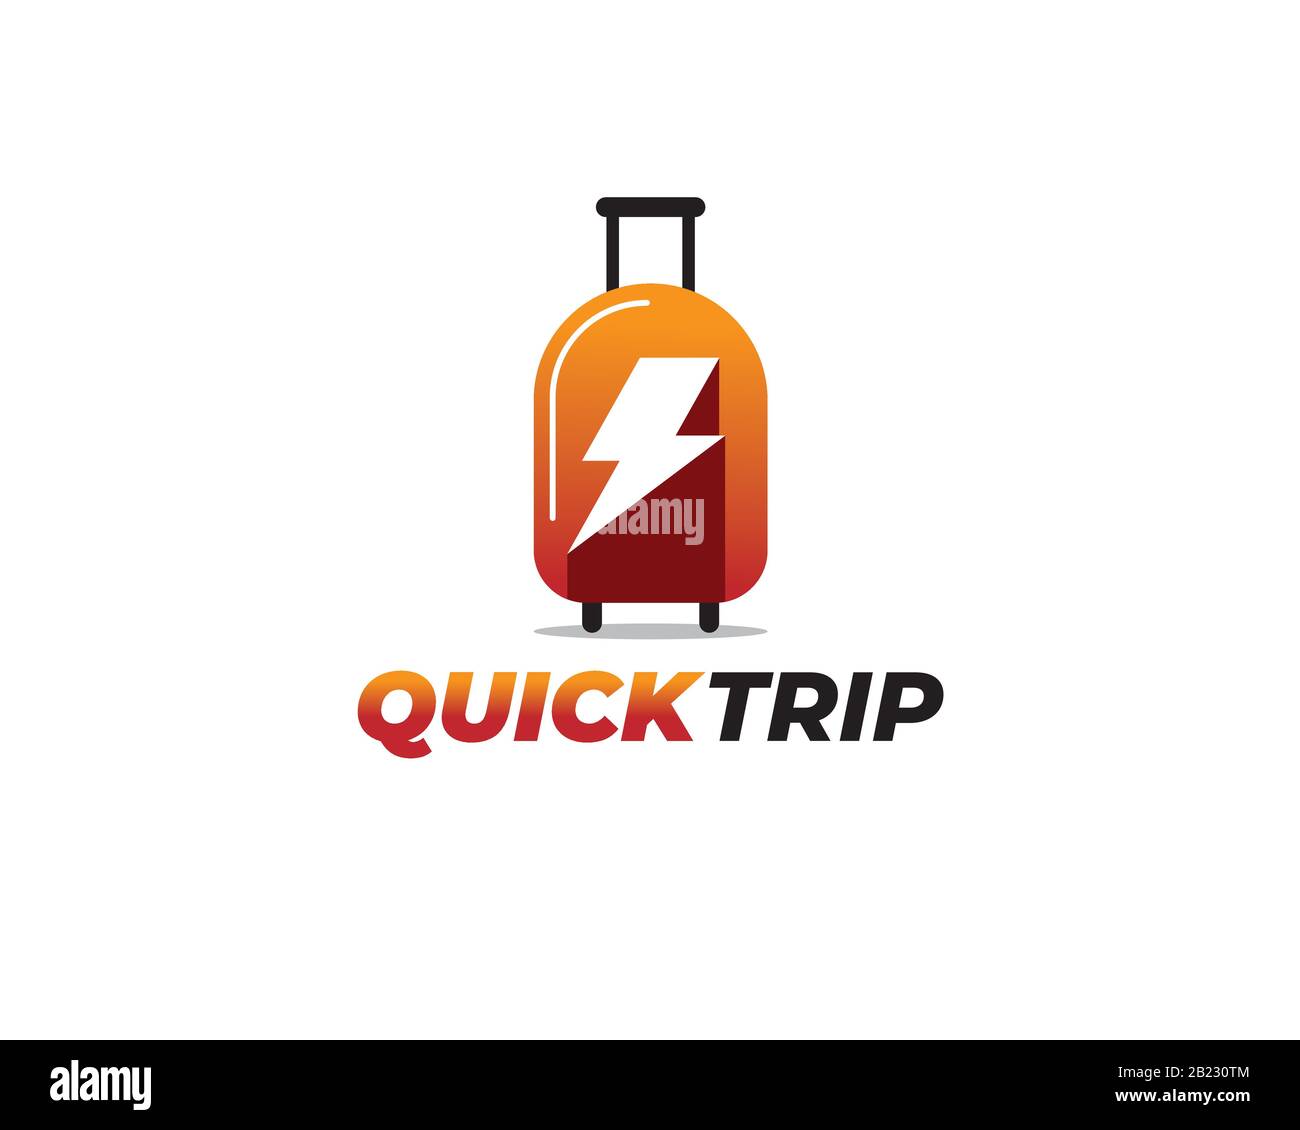 suitcase briefcase with lightning sign on it indicating its a quick trip logo Stock Vector